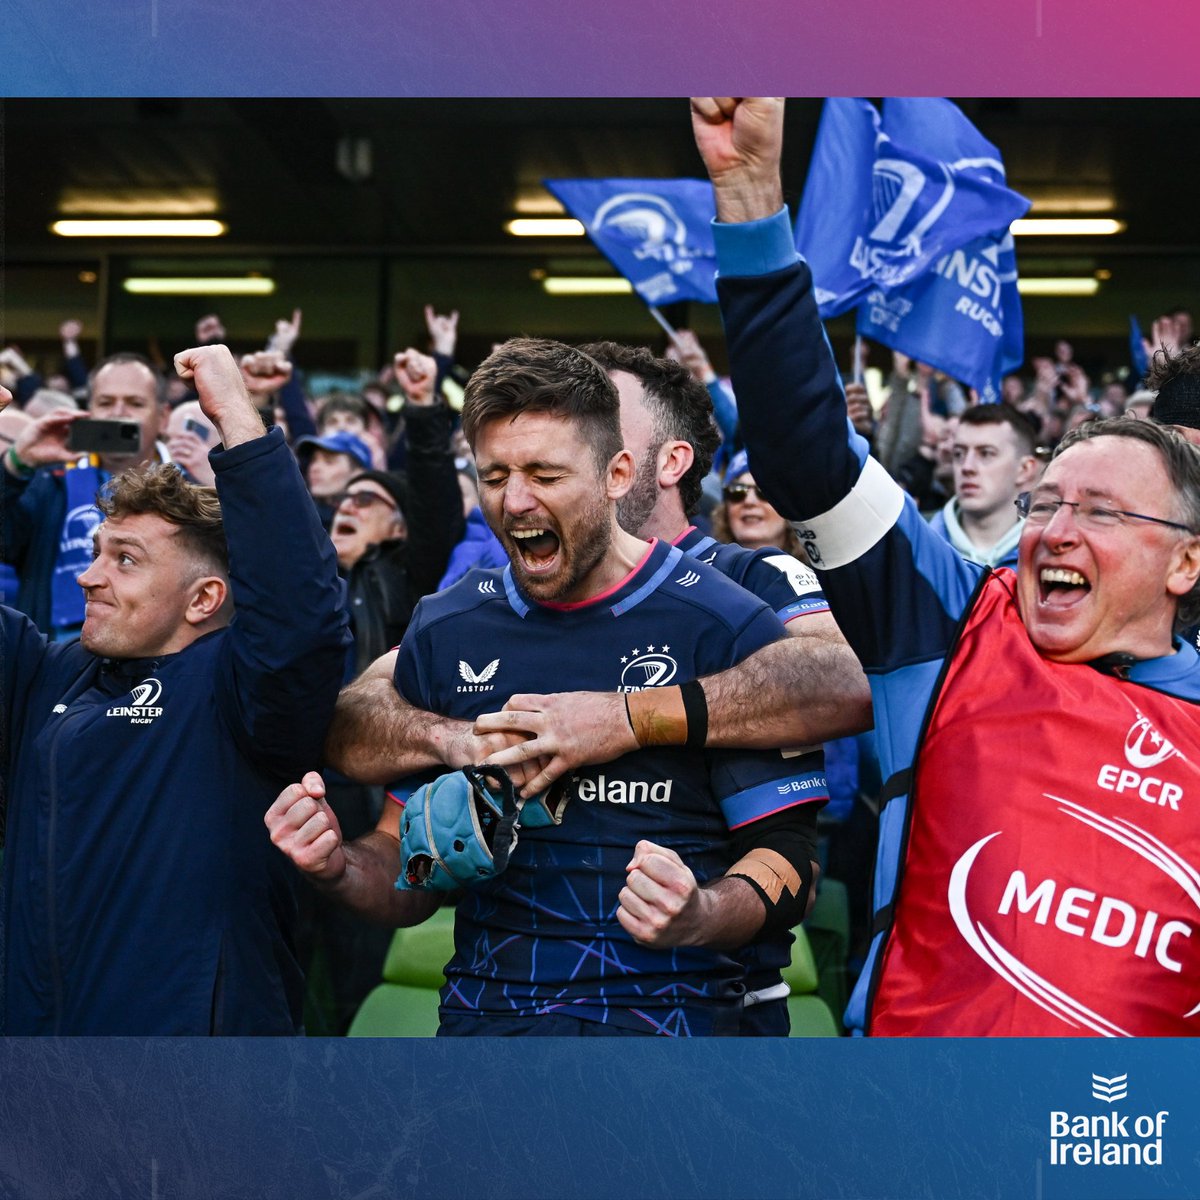 Ross Byrne is every Leinster supporter in this photo. 💪📸 When you #NeverStopCompeting for 80 minutes, the joy at the final whistle is very special. #LEIvSR #FromTheGroundUp